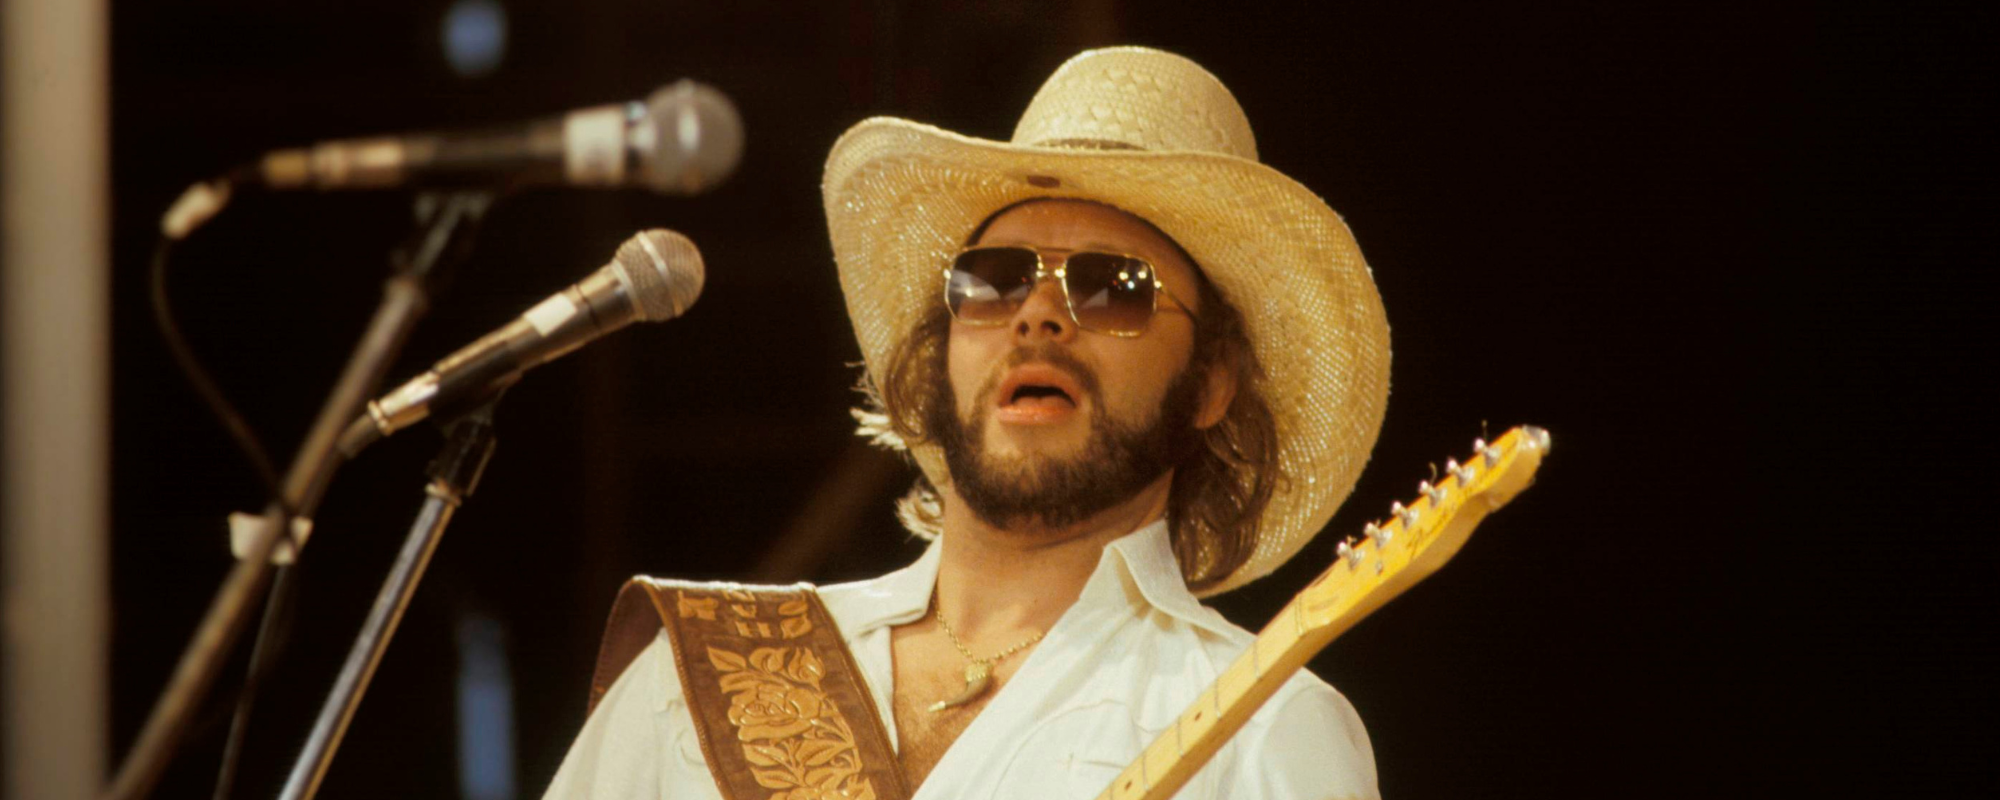 The Meaning Behind the Tongue-in-Cheek “Family Tradition” by Hank Williams Jr.